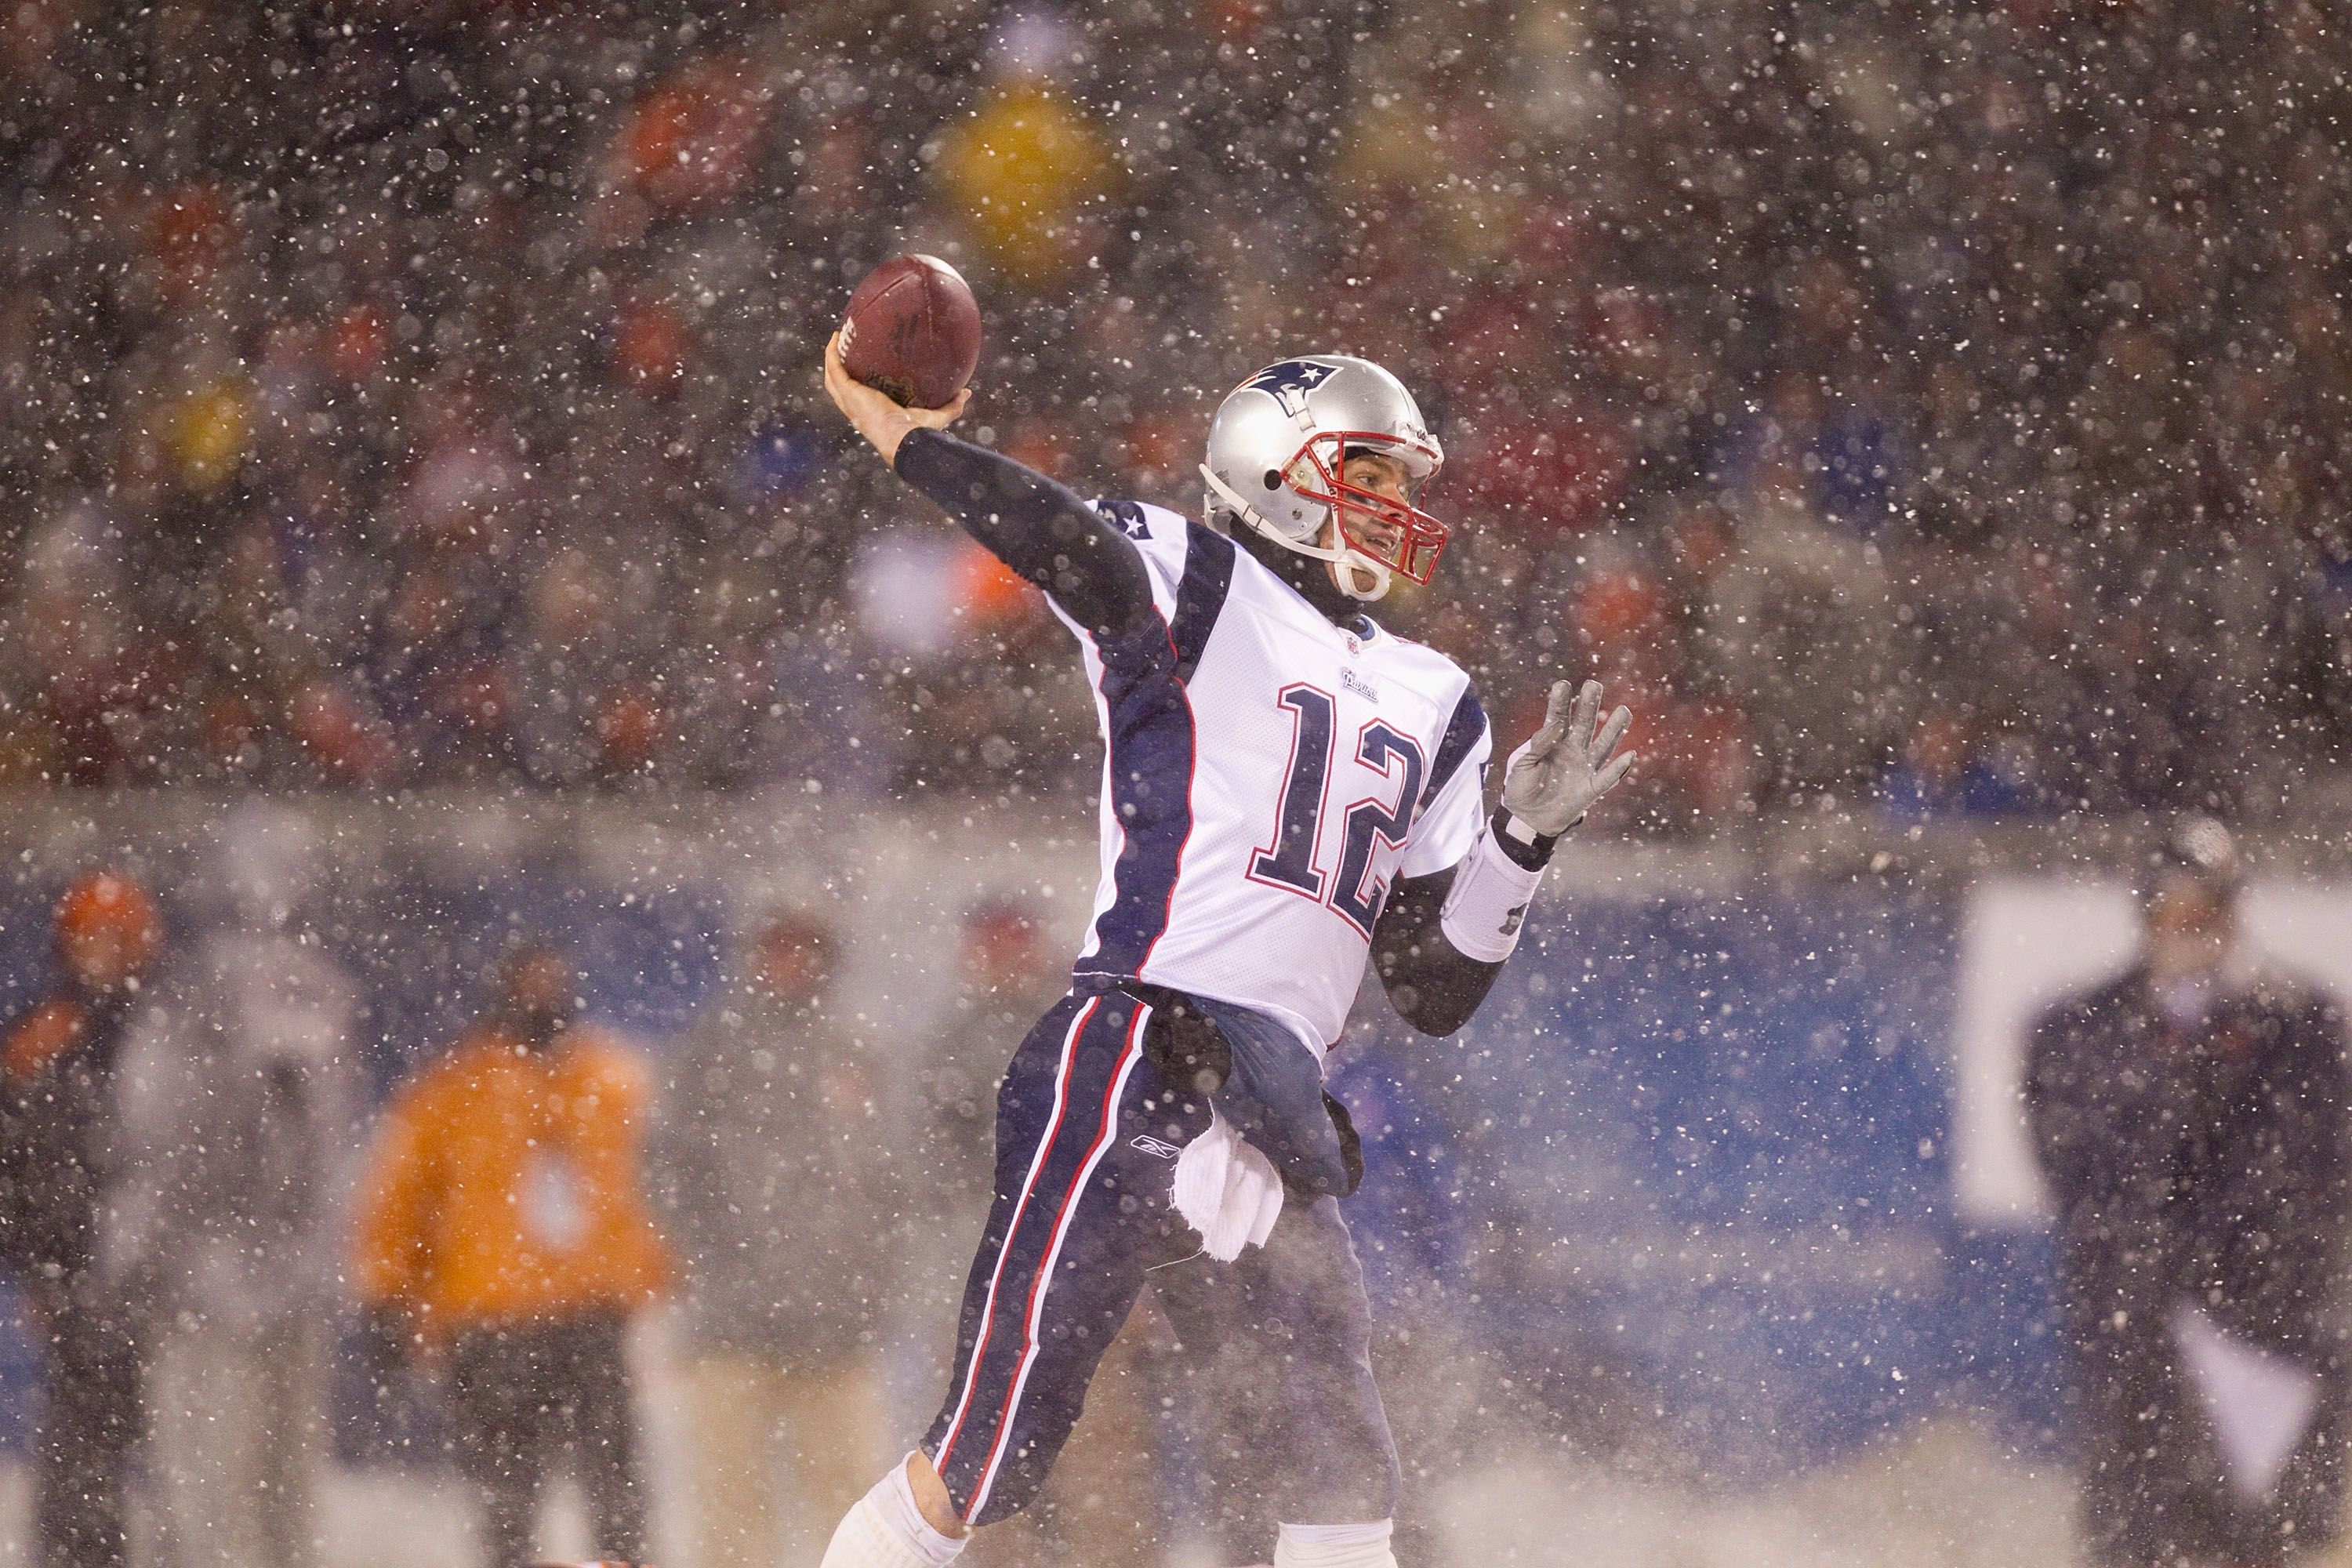 CHICAGO, IL - DECEMBER 12: Tom Brady #12 of the New England Patriots passes against the Chicago Bears at Soldier Field on December 12, 2010 in Chicago, Illinois.  The Patriots beat the Bears 36-7.  (Photo by Dilip Vishwanat/Getty Images)